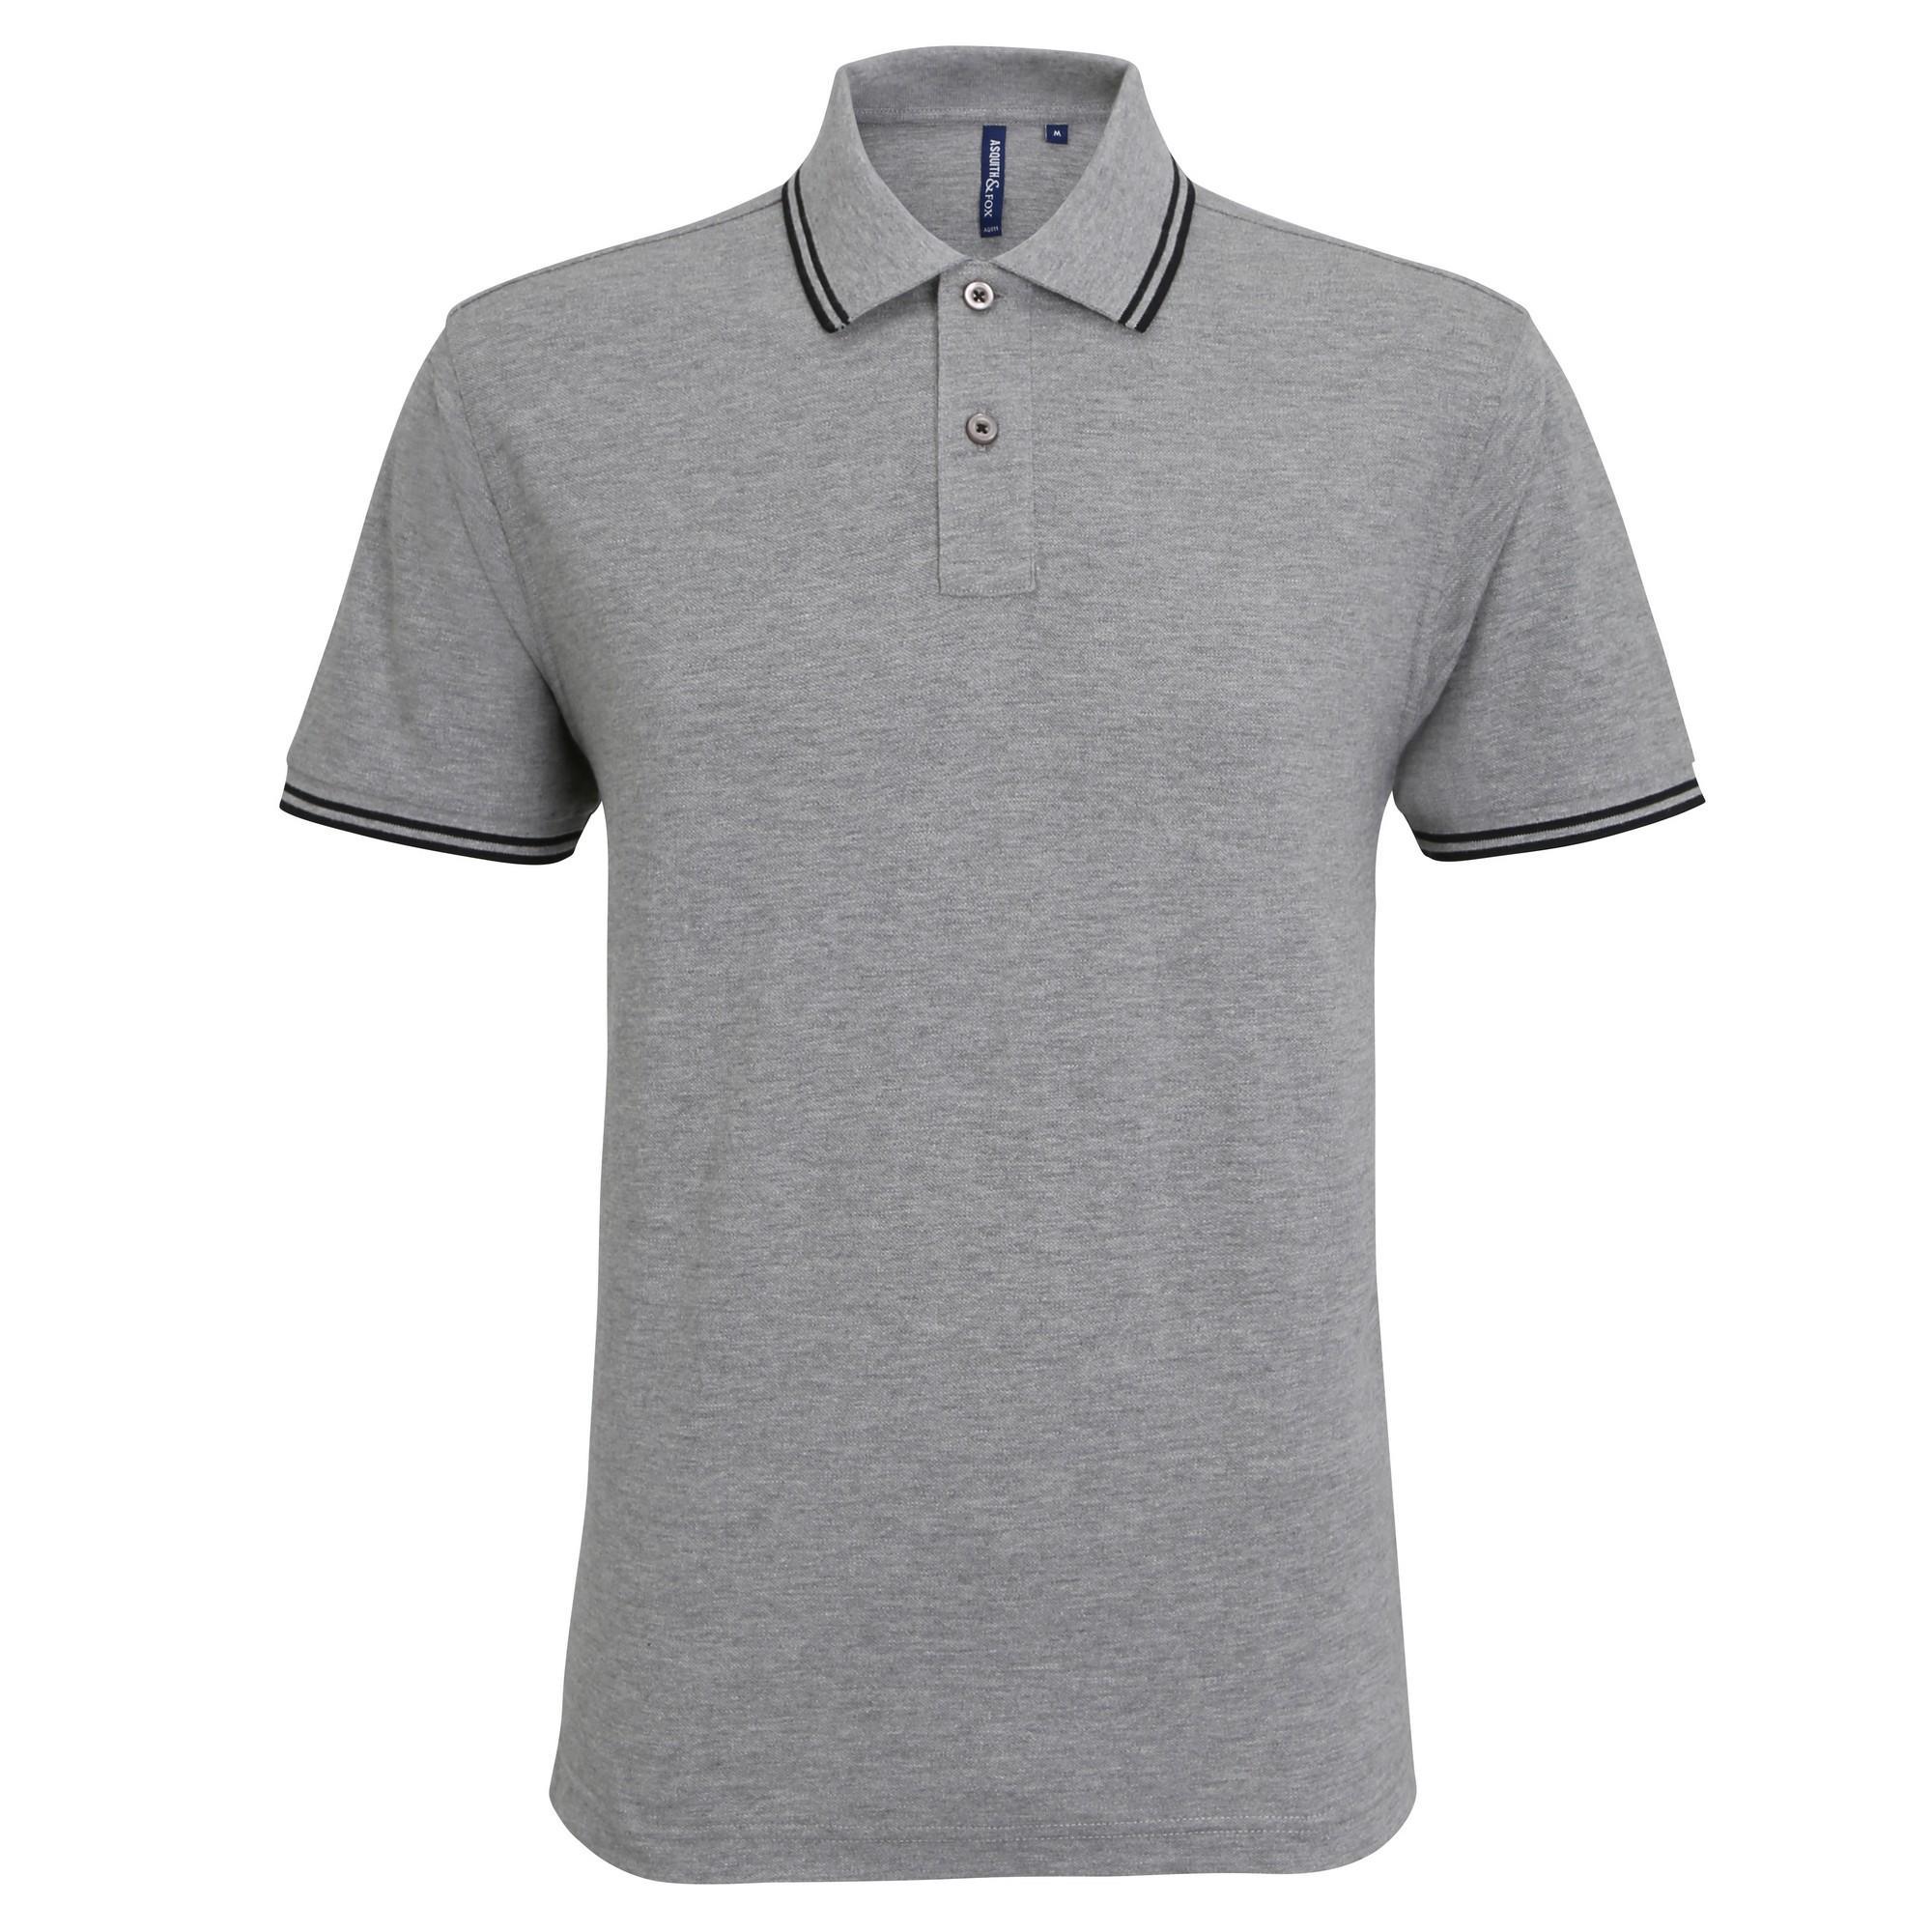 Asquith & Fox Mens Classic Fit Tipped Polo Shirt (Heather Grey/Black) (M)